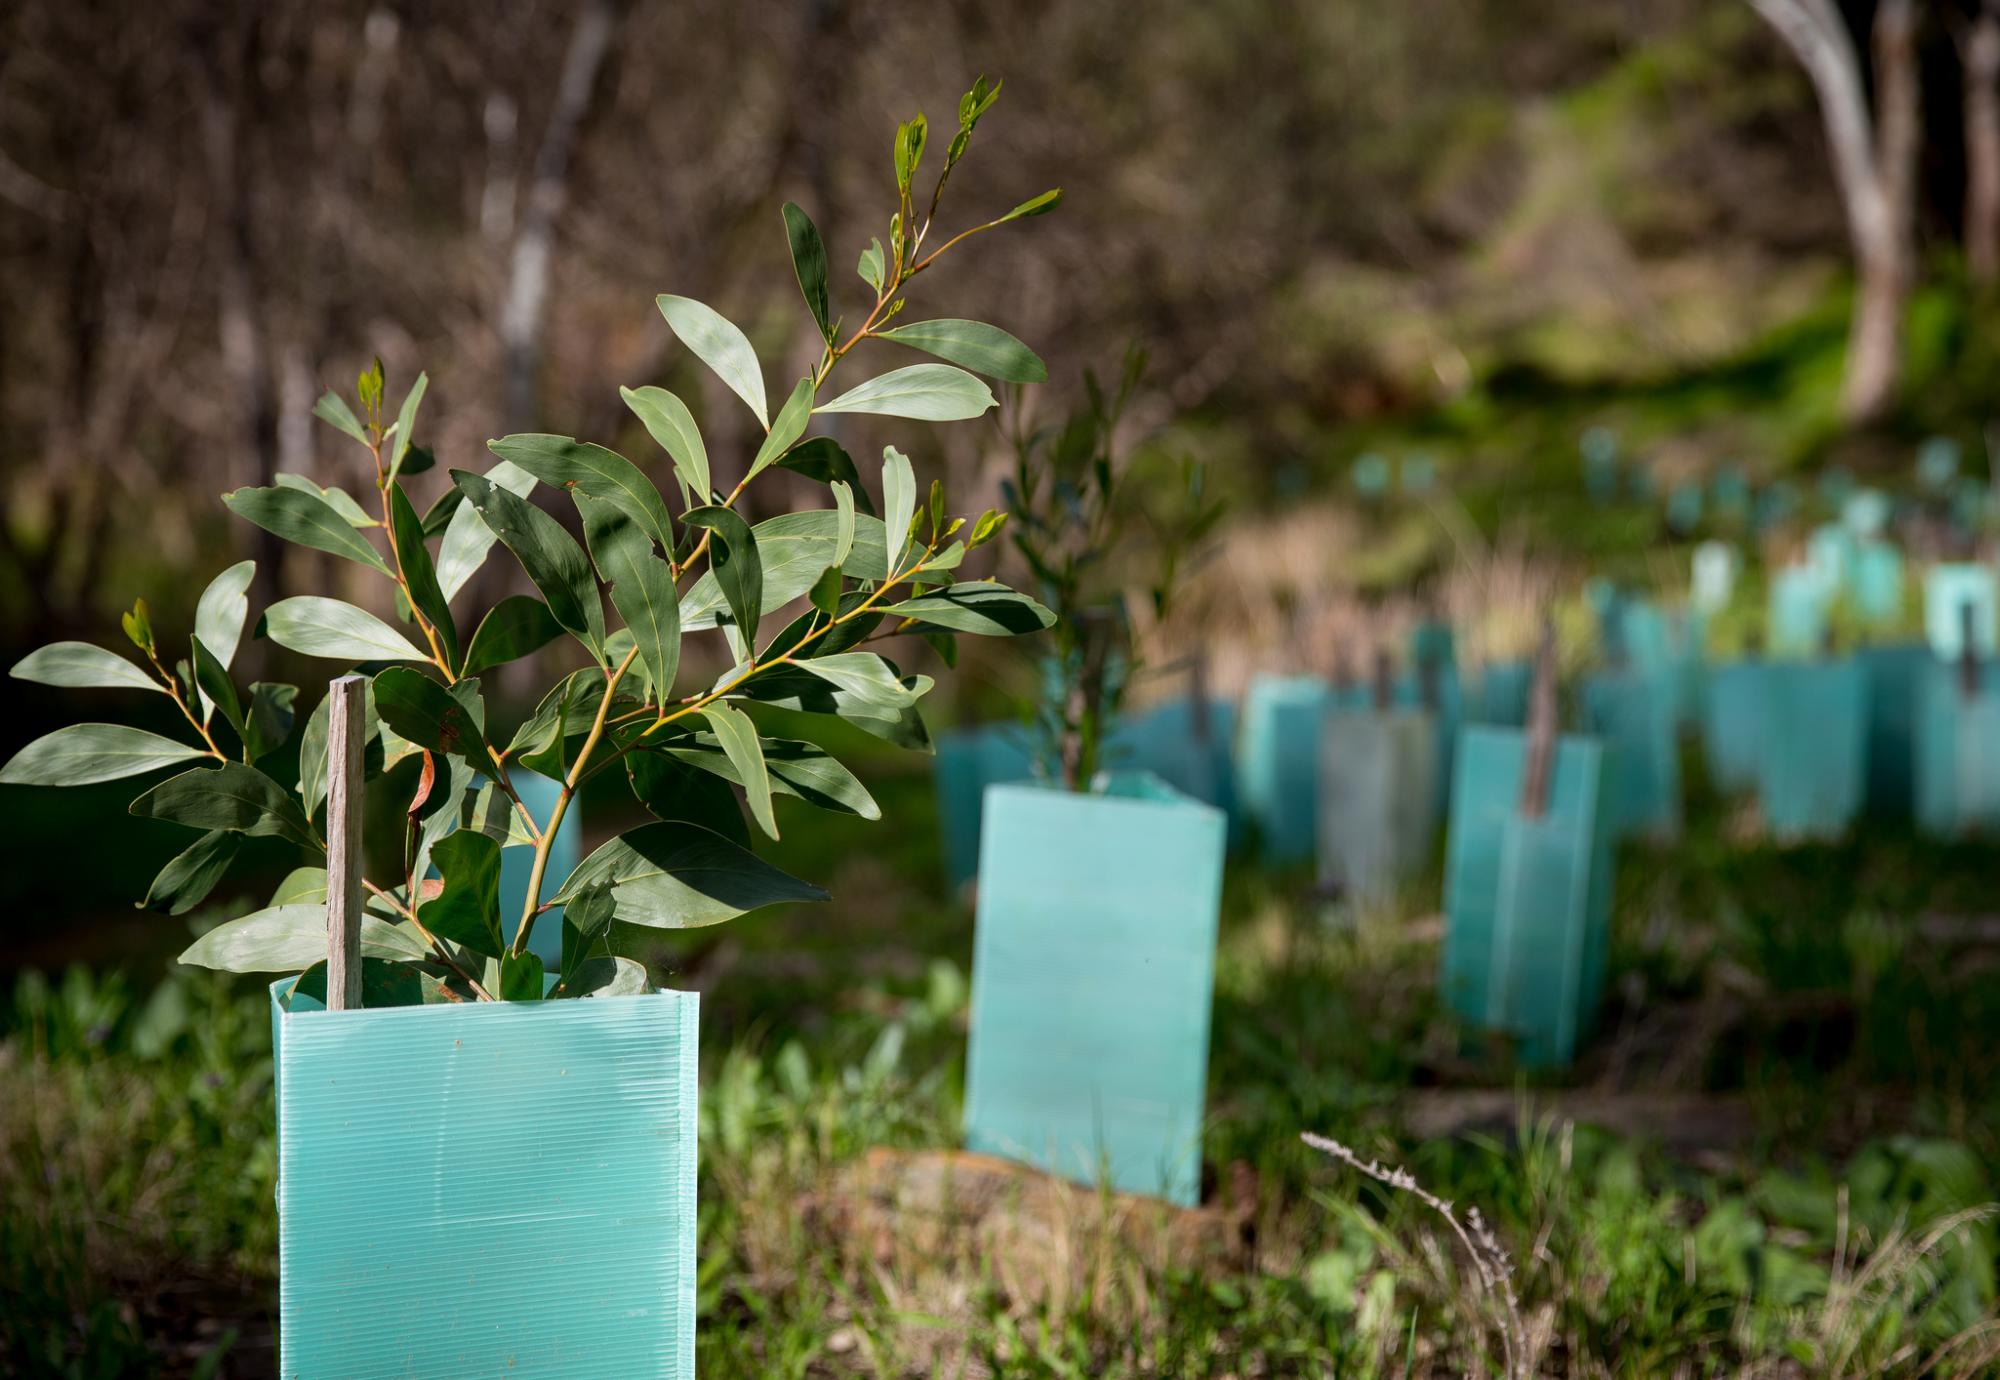 Freshly planted trees in the ground.